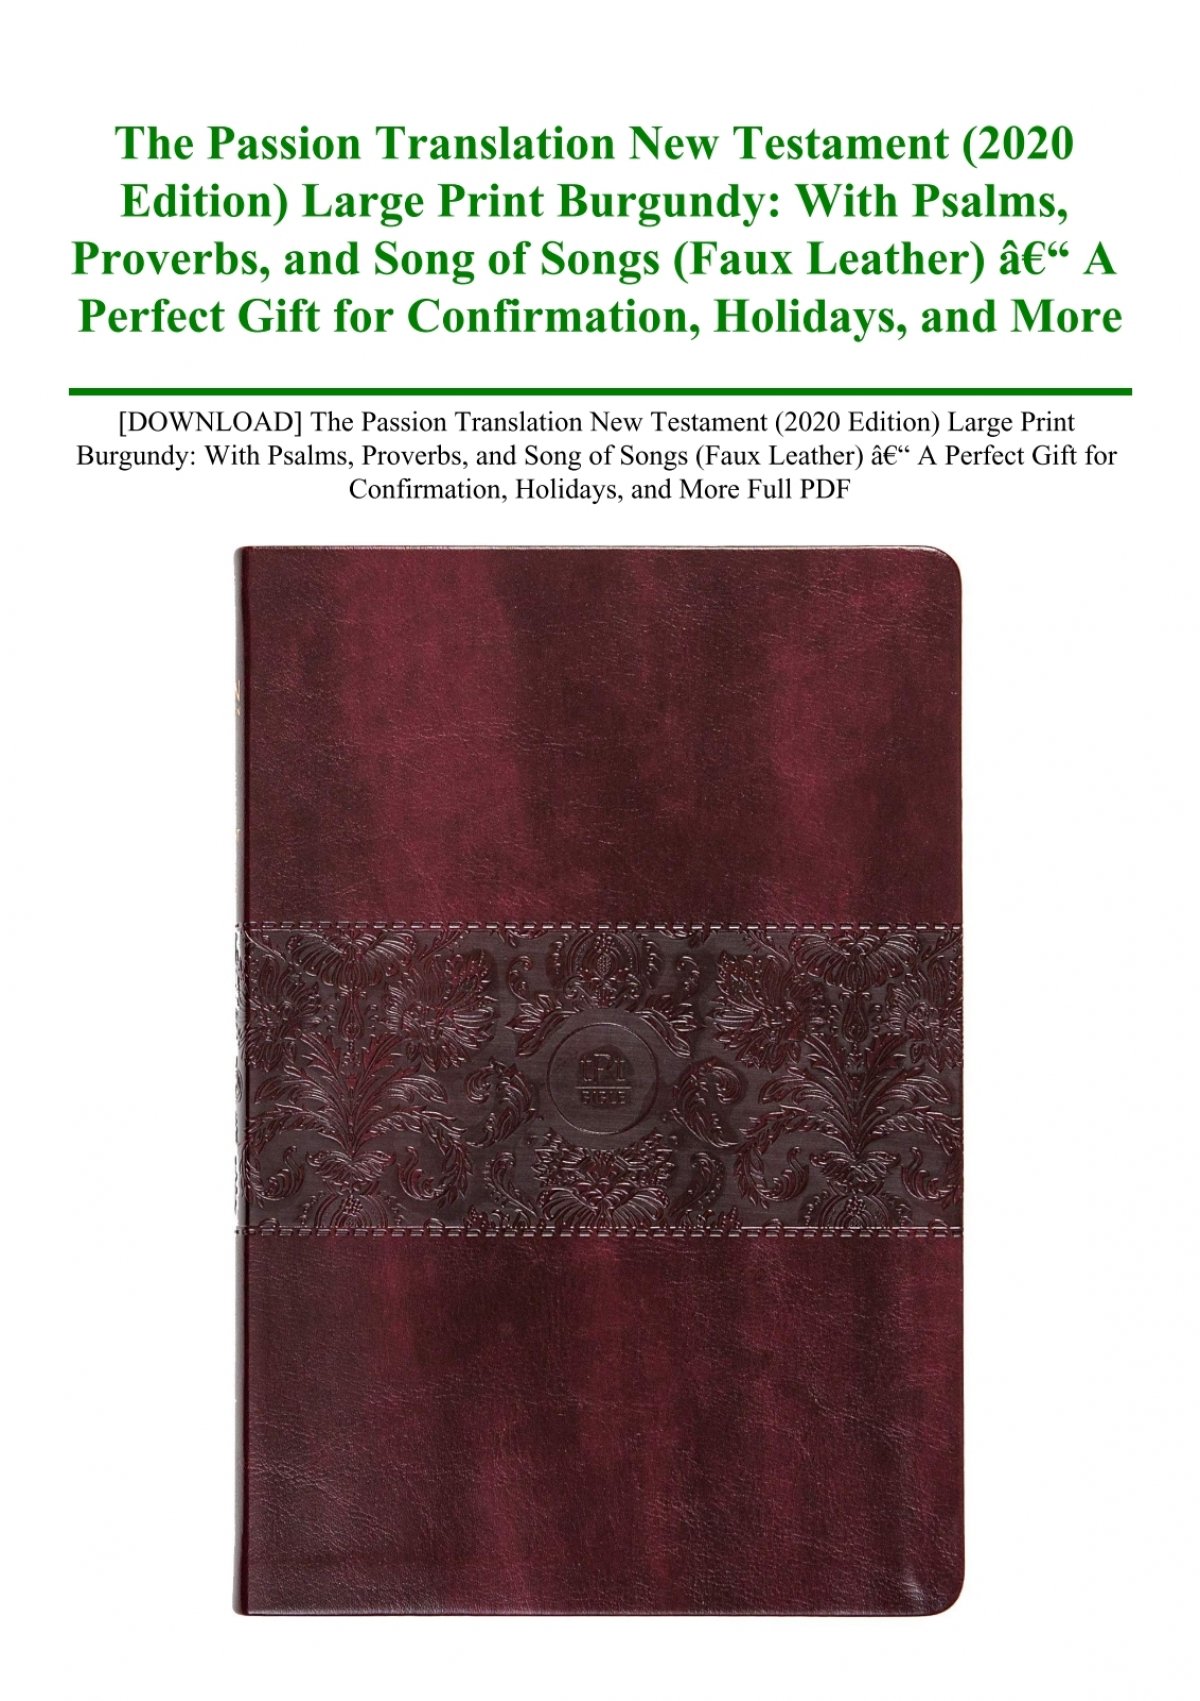 Download The Passion Translation New Testament 2020 Edition Large Print Burgundy With Psalms